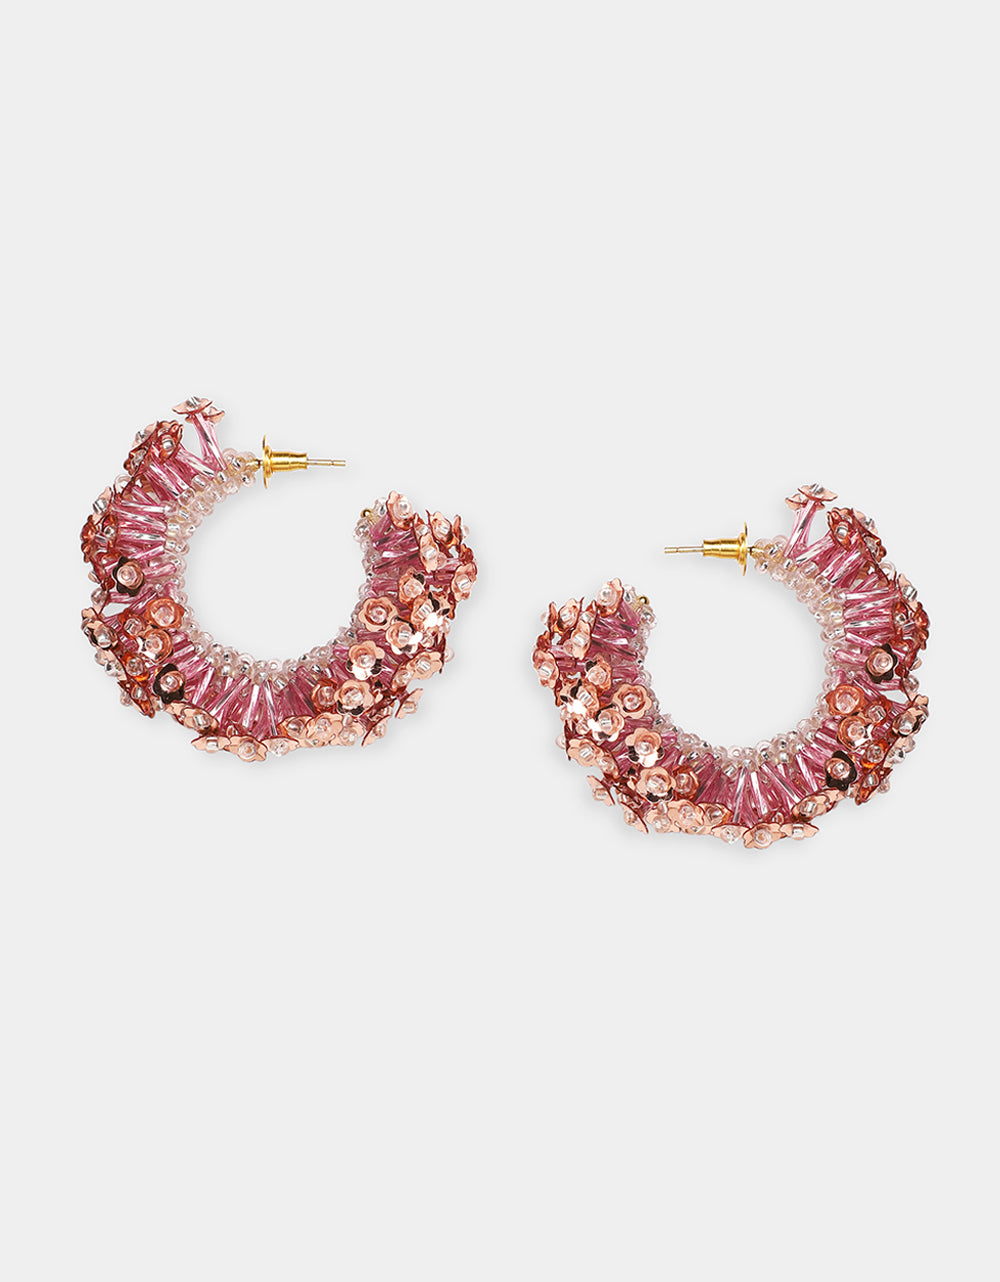 BOUCLES D'OREILLES BLOSSOM HOOPS SMALL